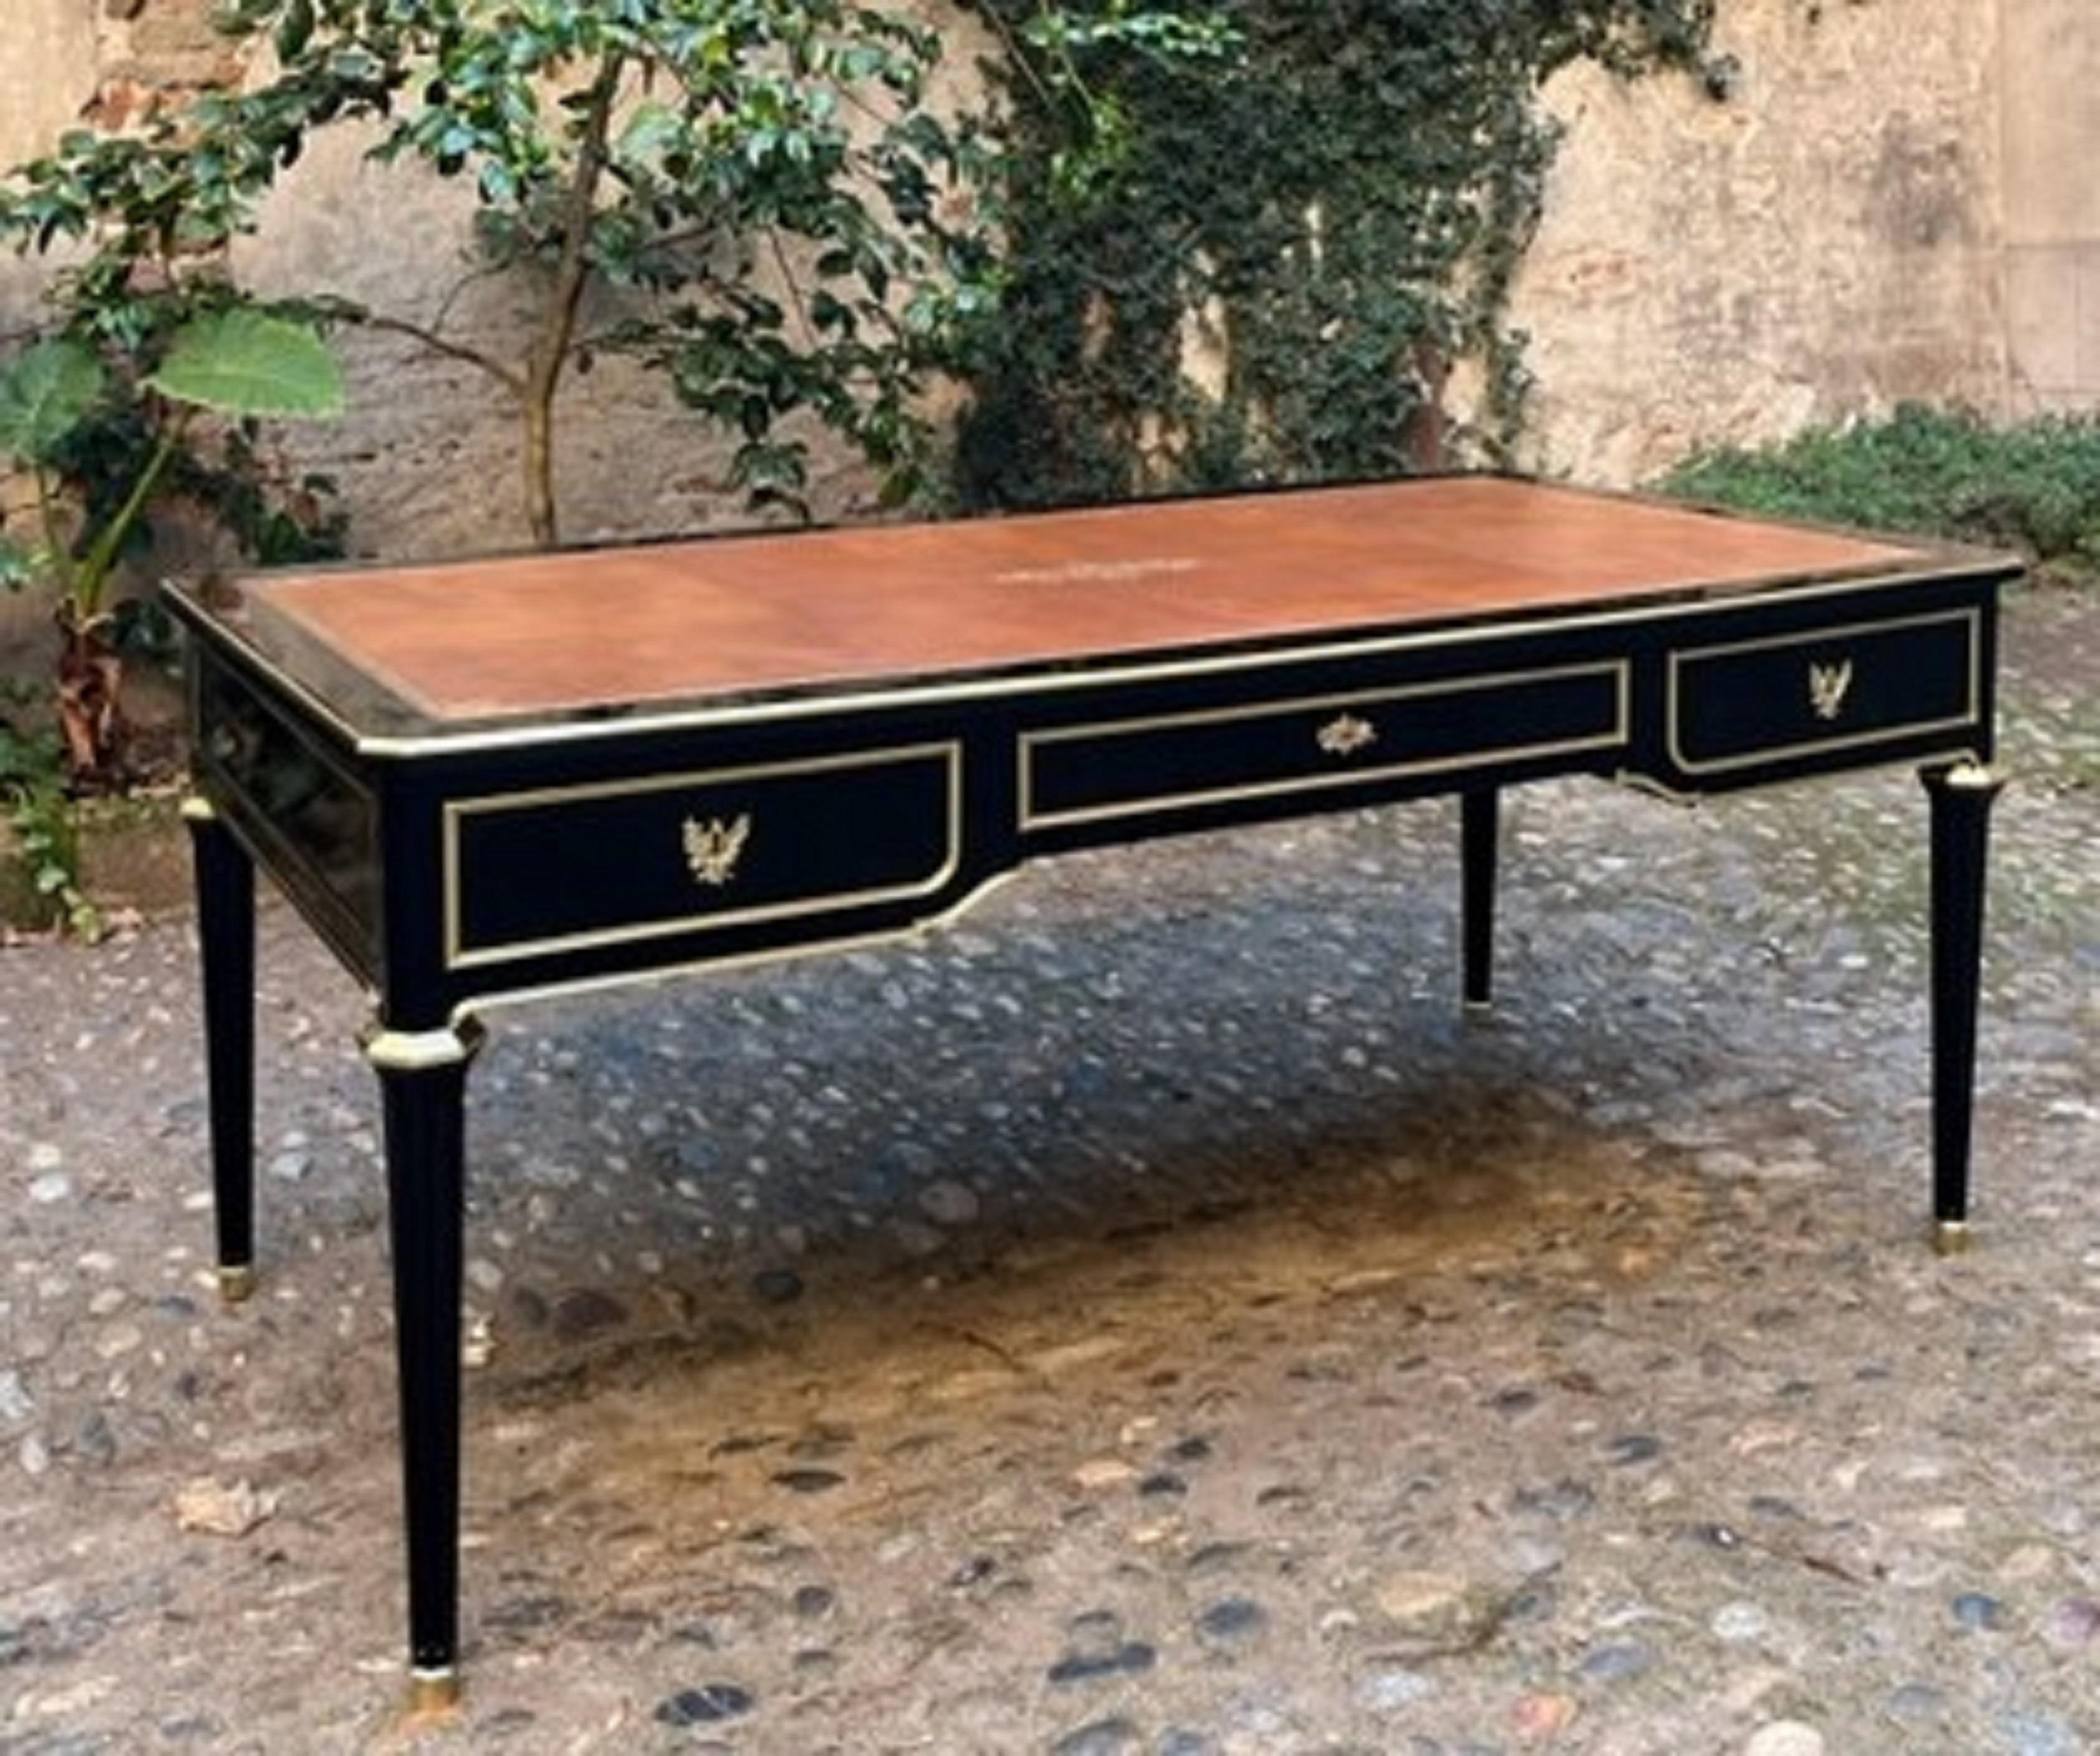 Elegant large desk (double-sided)
Louis XVI style, 19th century period.
Ornamentation of gilded brass (Ingot mold, drawer frames and highlighted nets).
Leather upholstery in very good condition.
Three belt drawers.